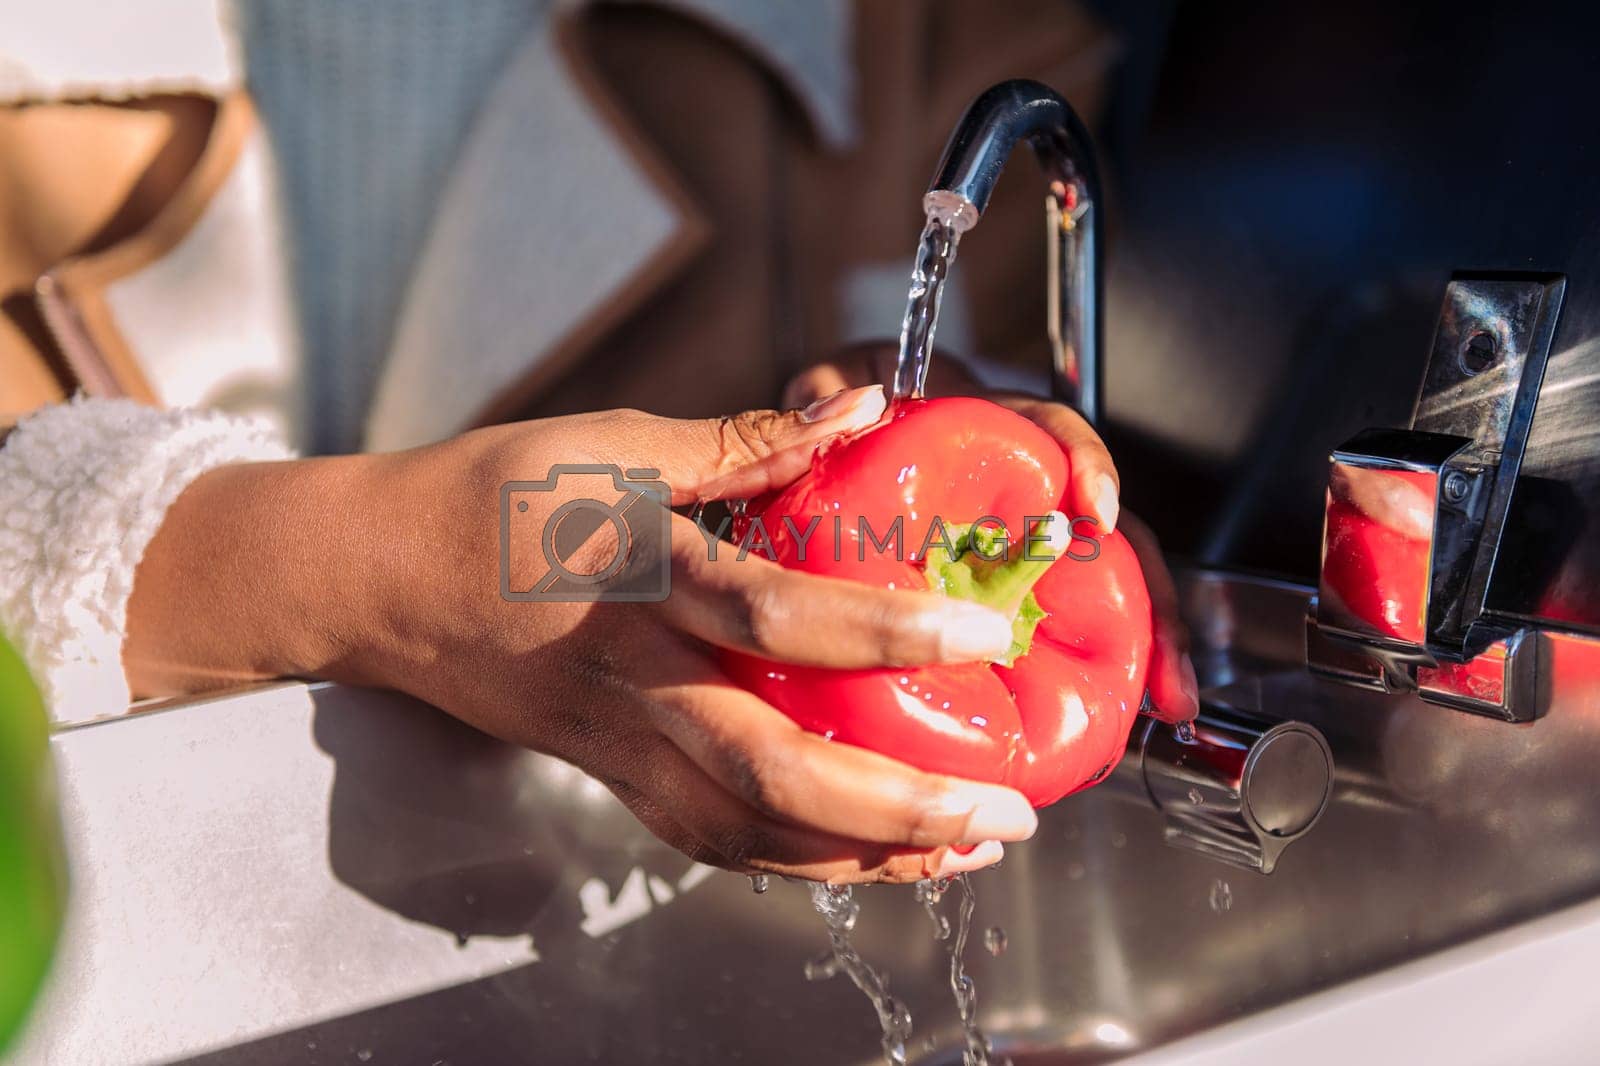 Royalty free image of washing red pepper in the sink of a camper van by raulmelldo